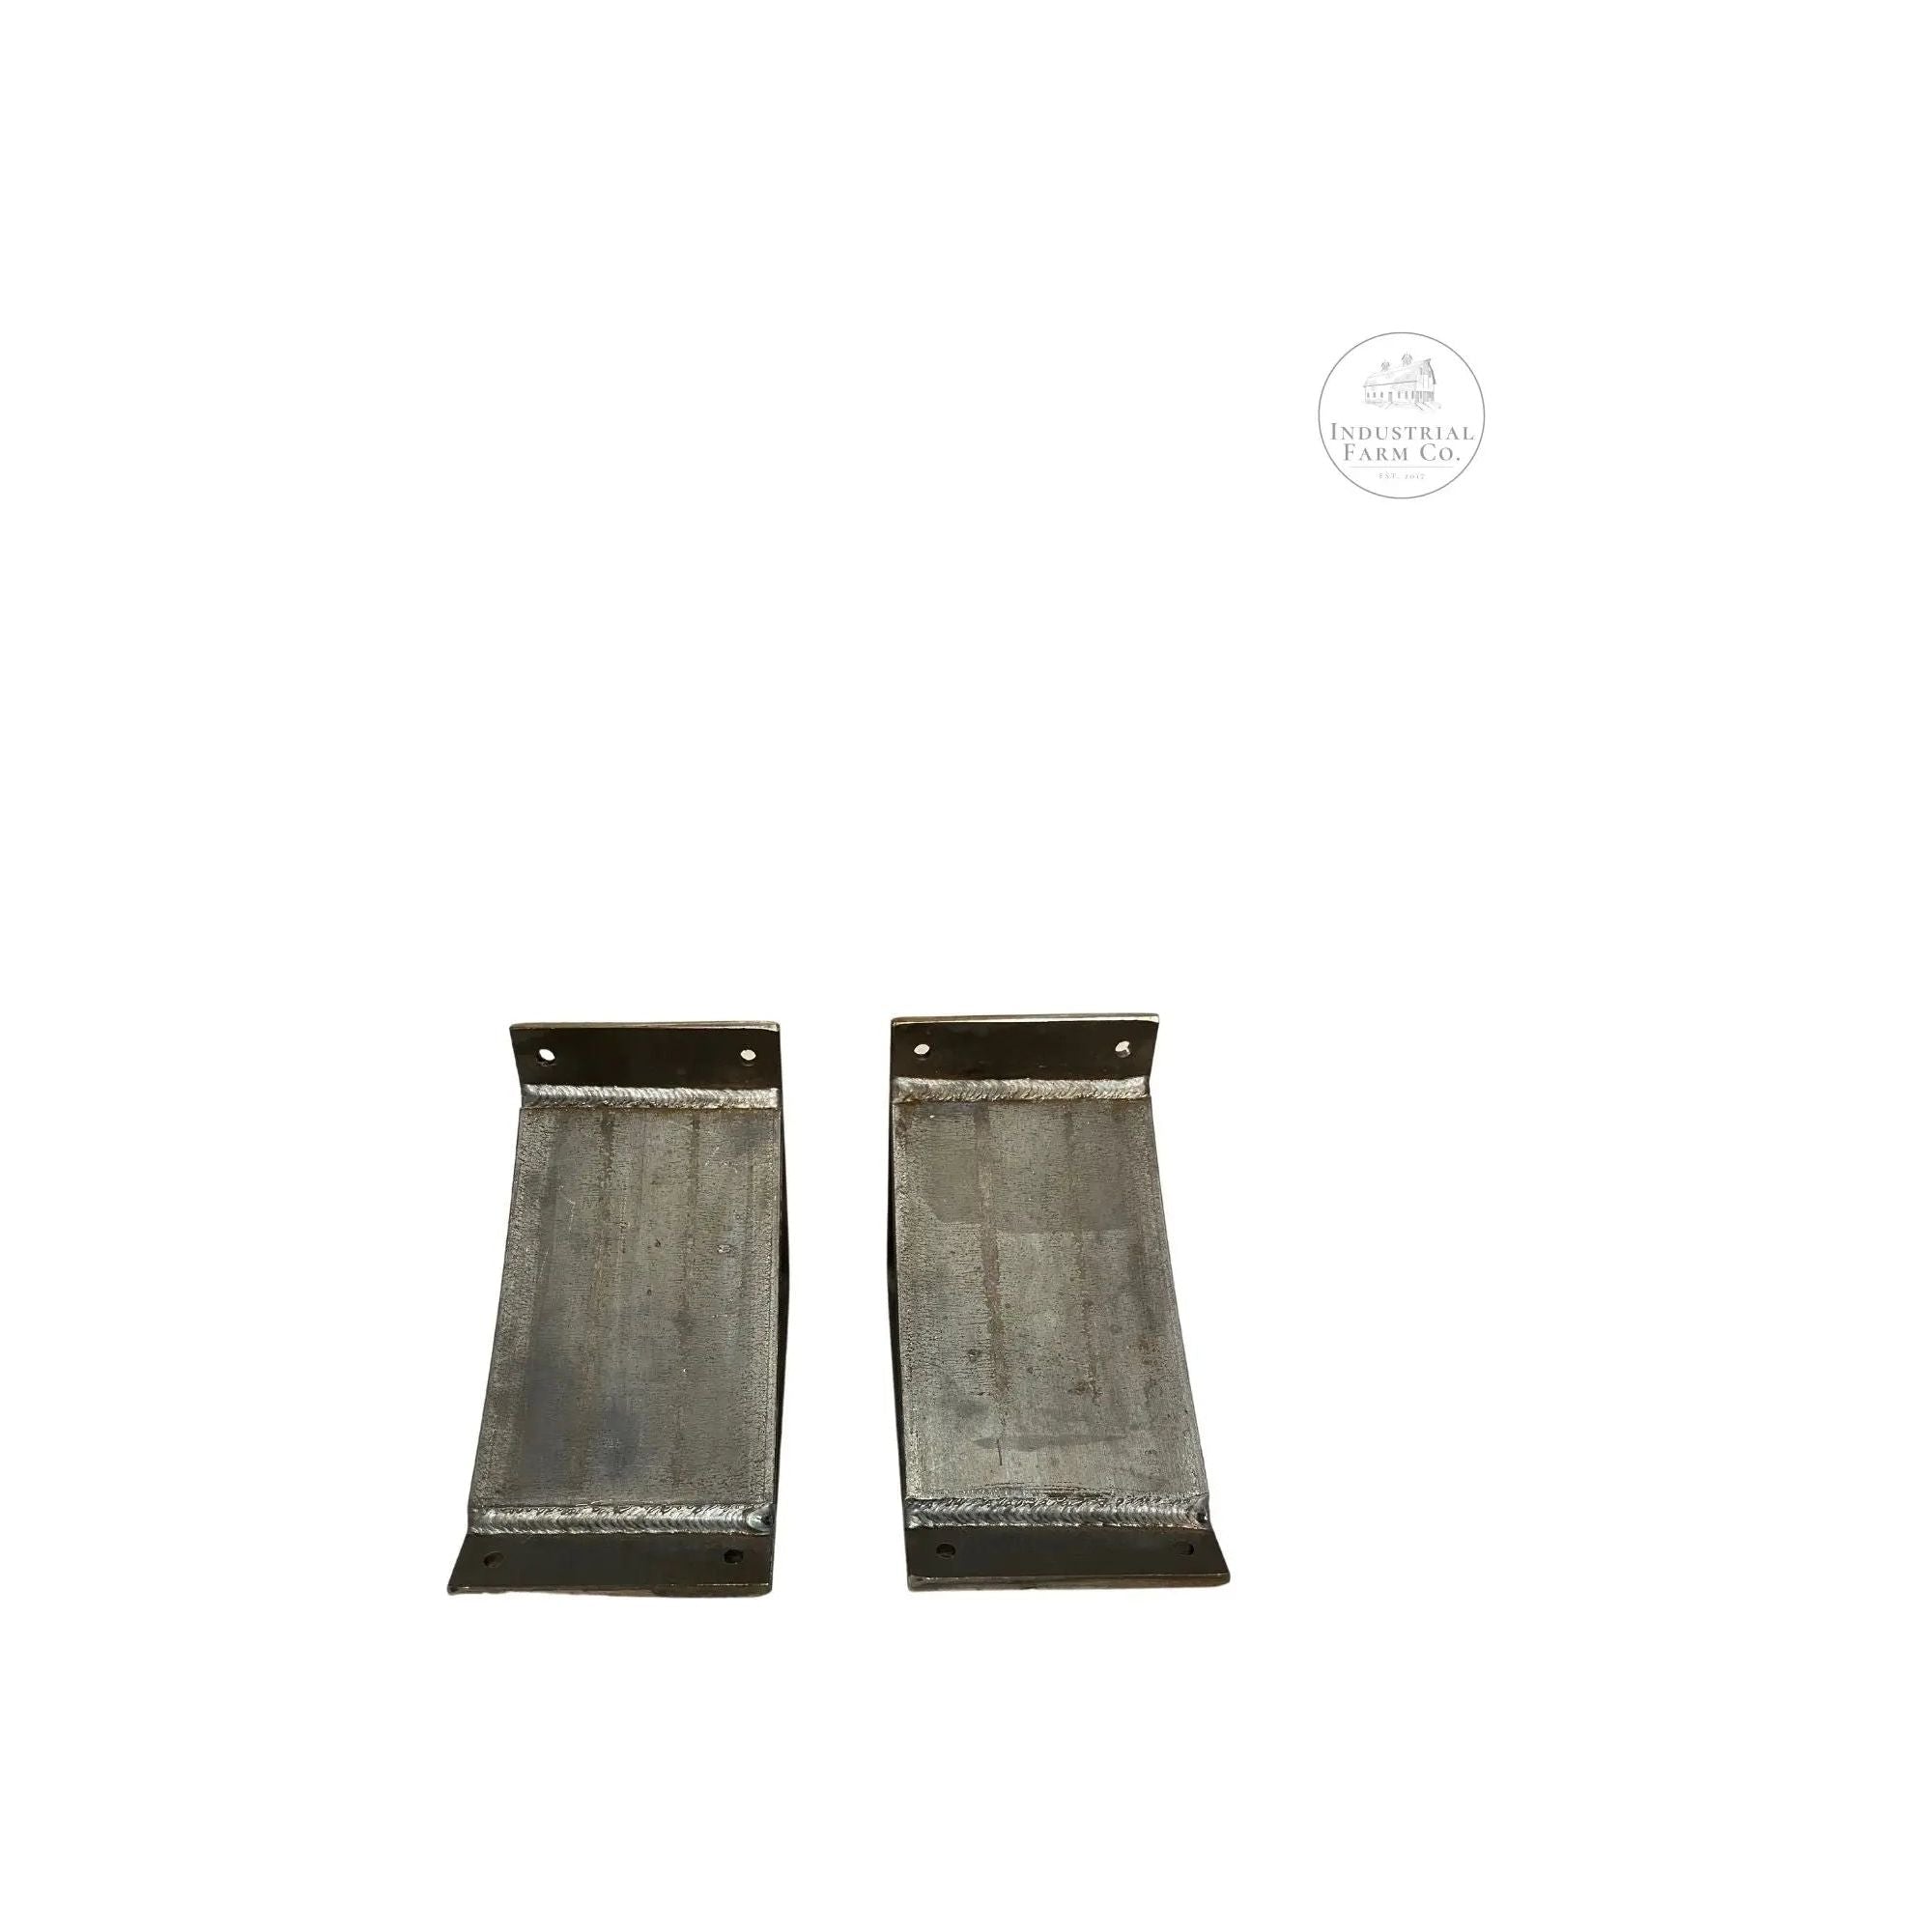 The Lexica Floating Shelf Supports 4 3/4 x 7 (Set of 2)  Default Title   | Industrial Farm Co